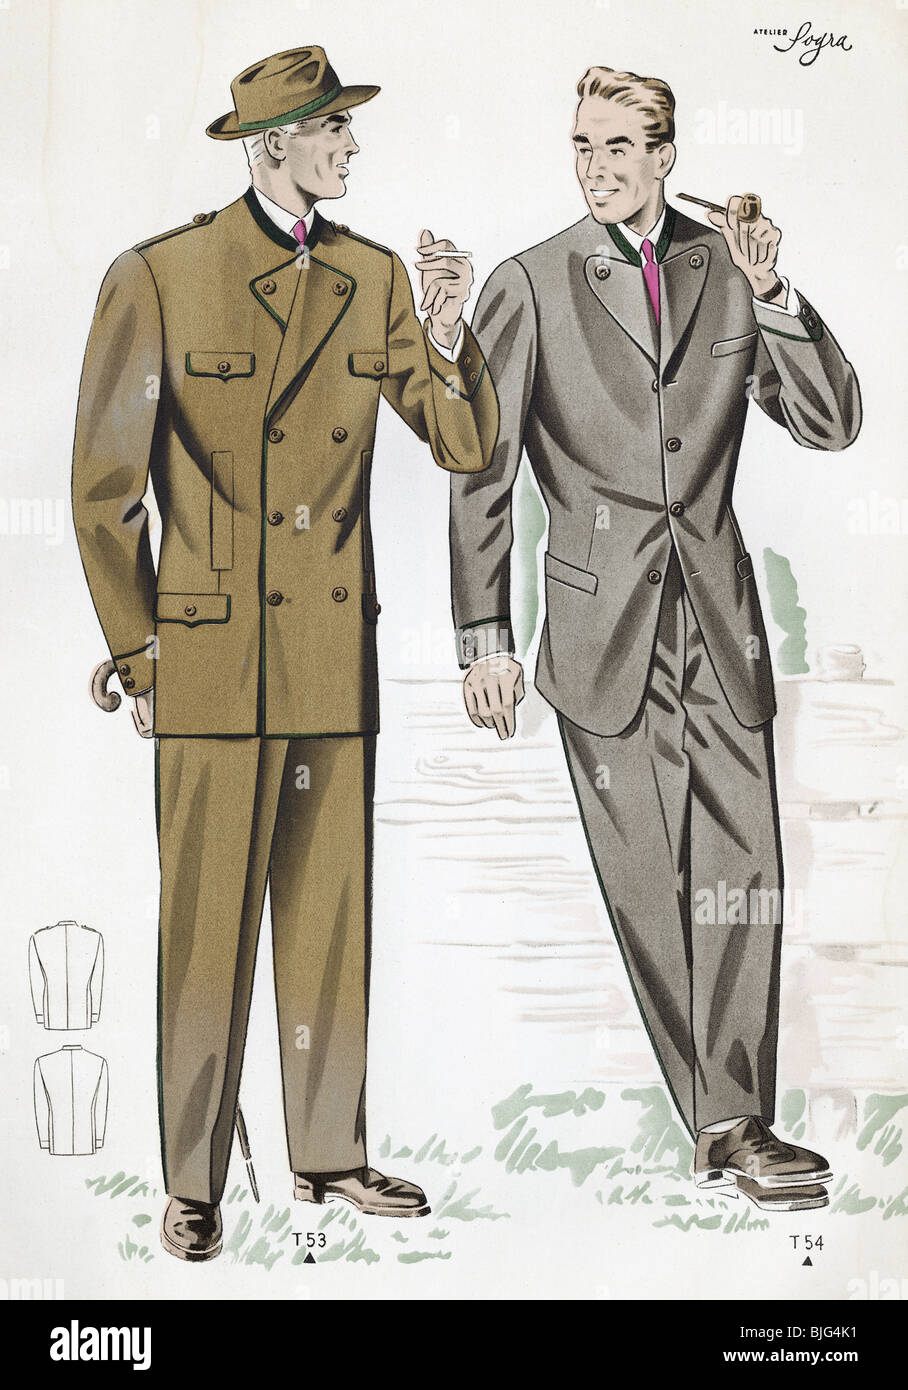 fashion, 1950s, clothes, clothing, men's fashion, two traditional suits for  men, illustration from: "Trachtenmodelle fuer Damen und Herren", No. 2,  Vienna, Austria, circa 1950 Stock Photo - Alamy